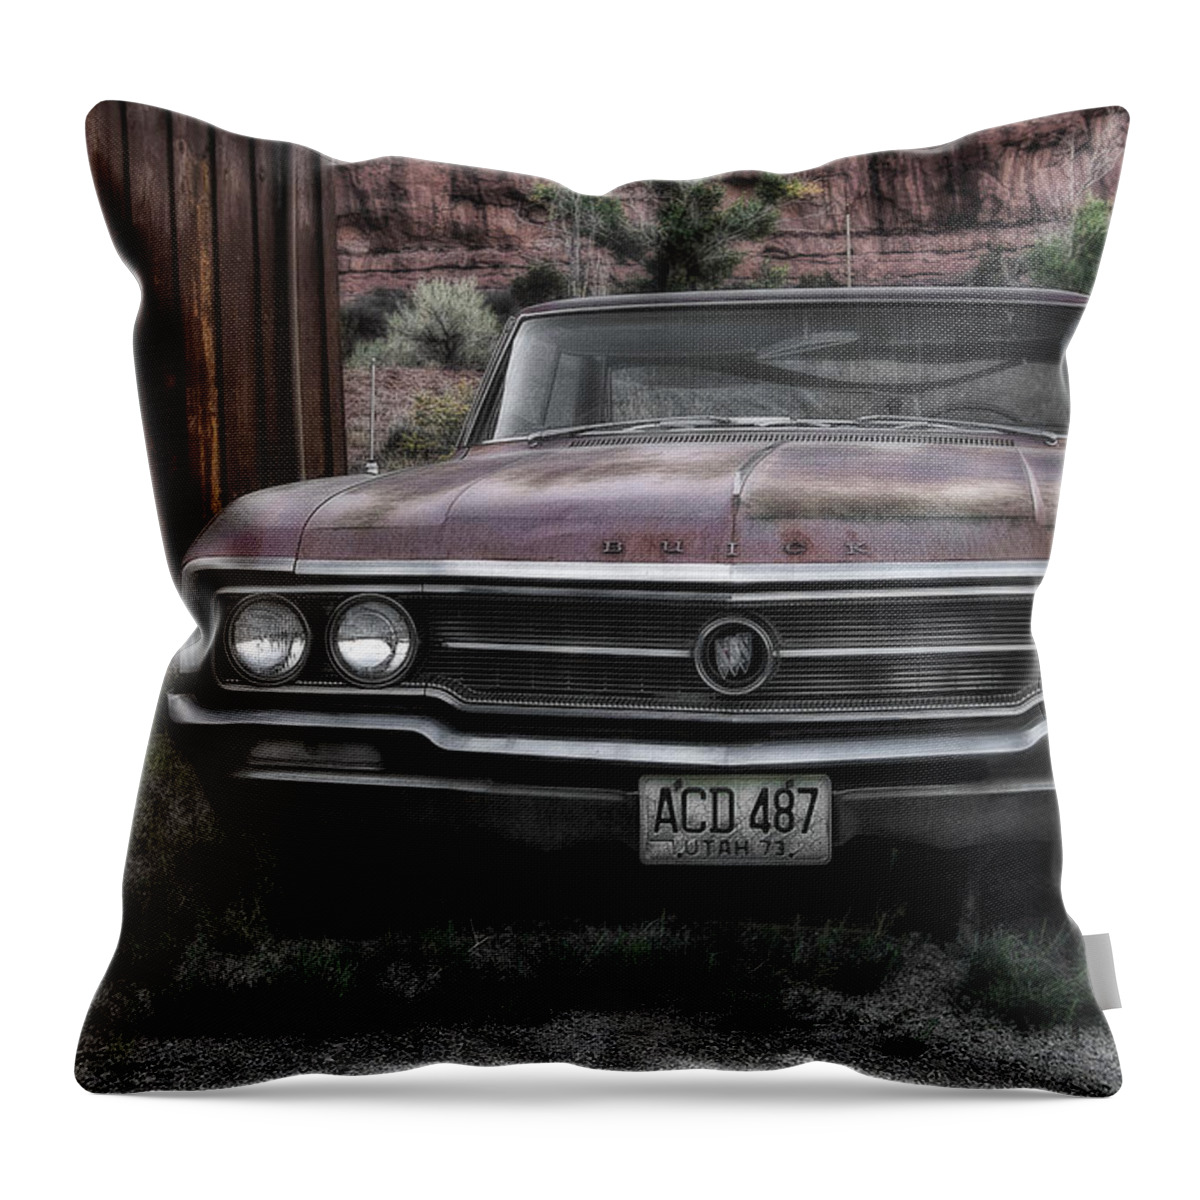 Buick Throw Pillow featuring the photograph Old Buick by Erika Fawcett